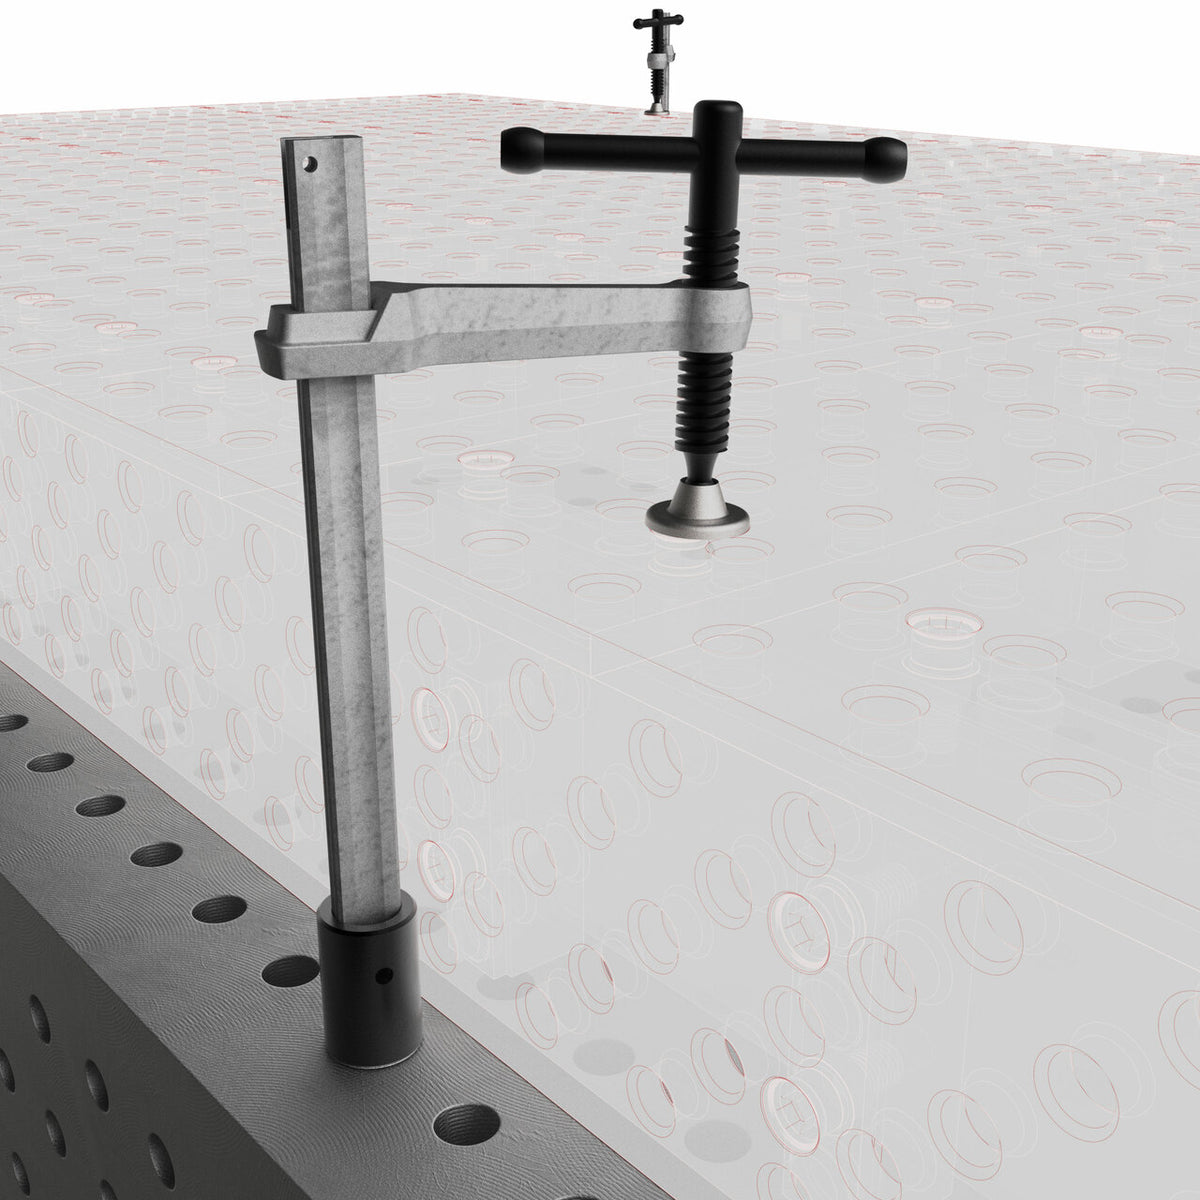 Quick Clamp - 19 mm System